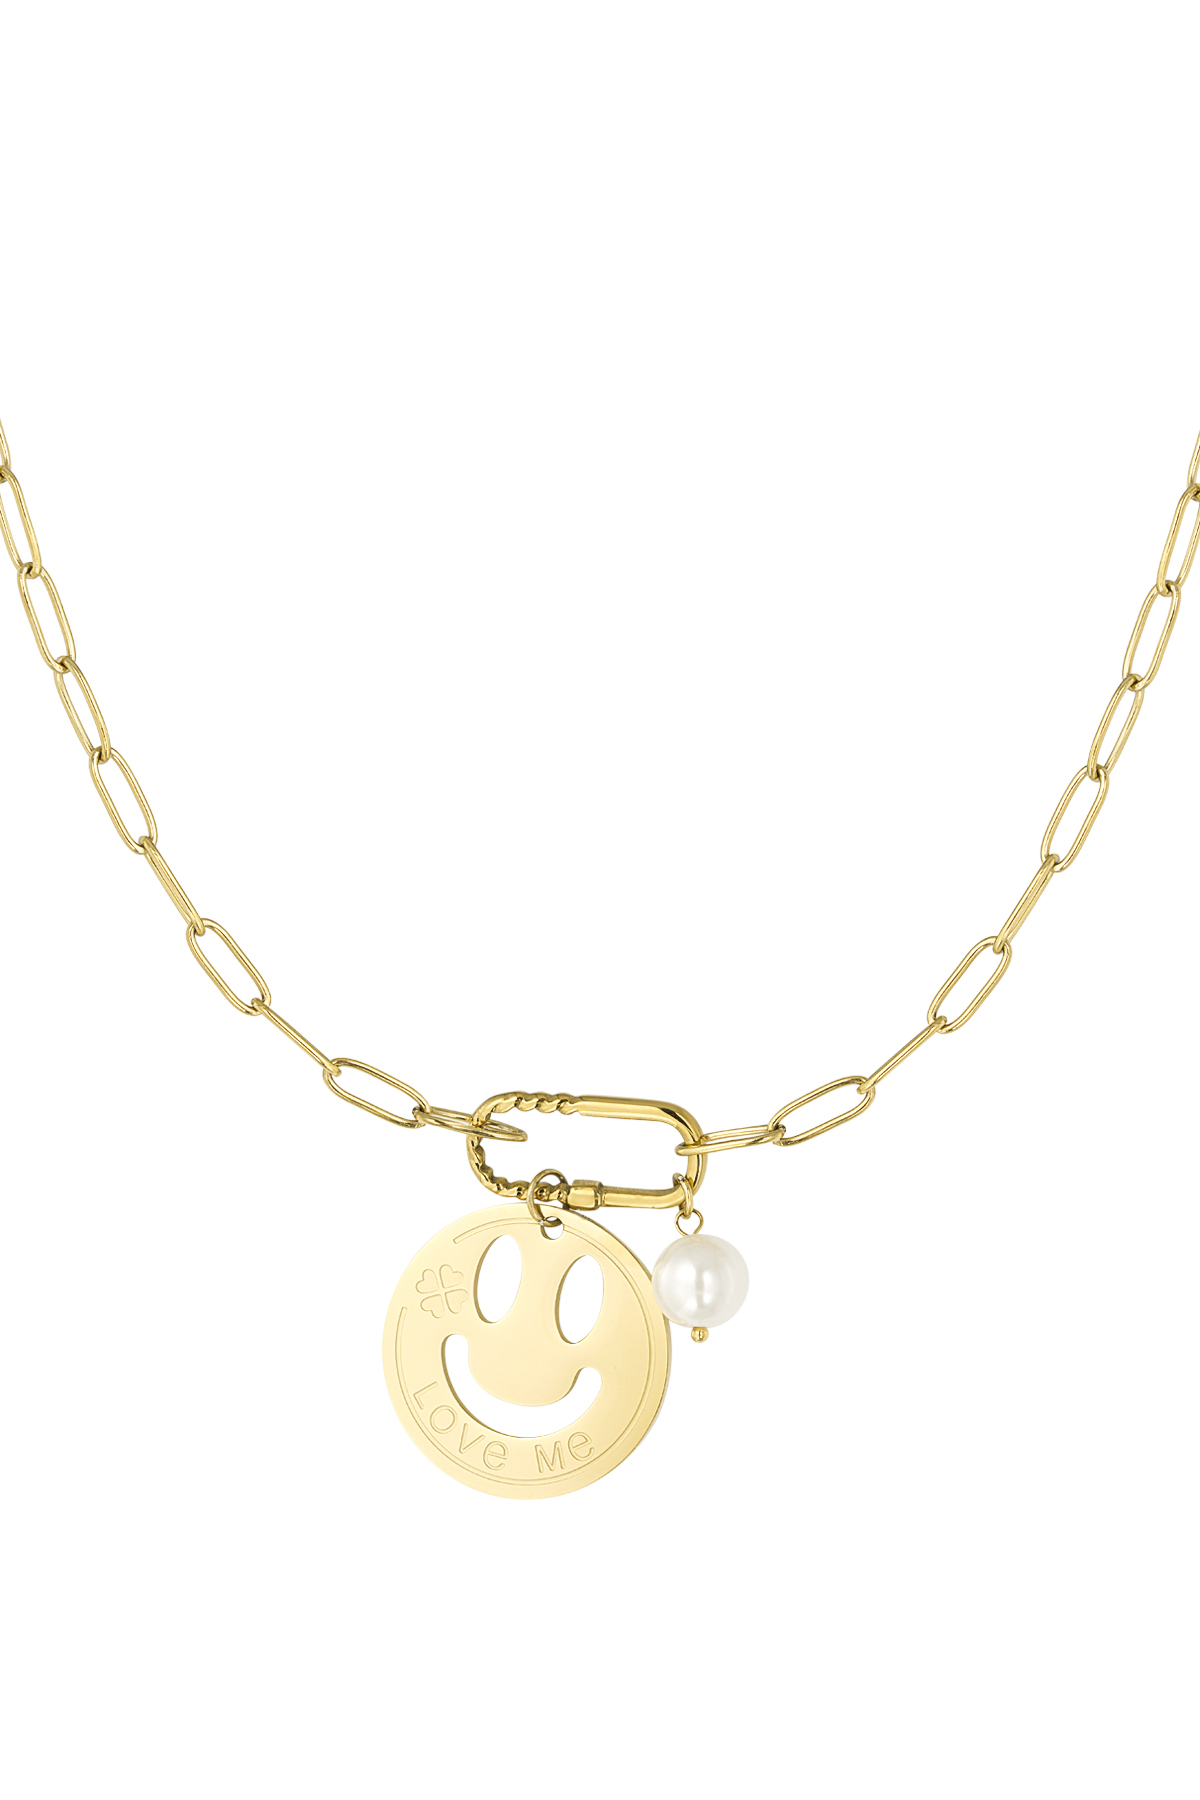 Smiley link necklace - gold  h5 